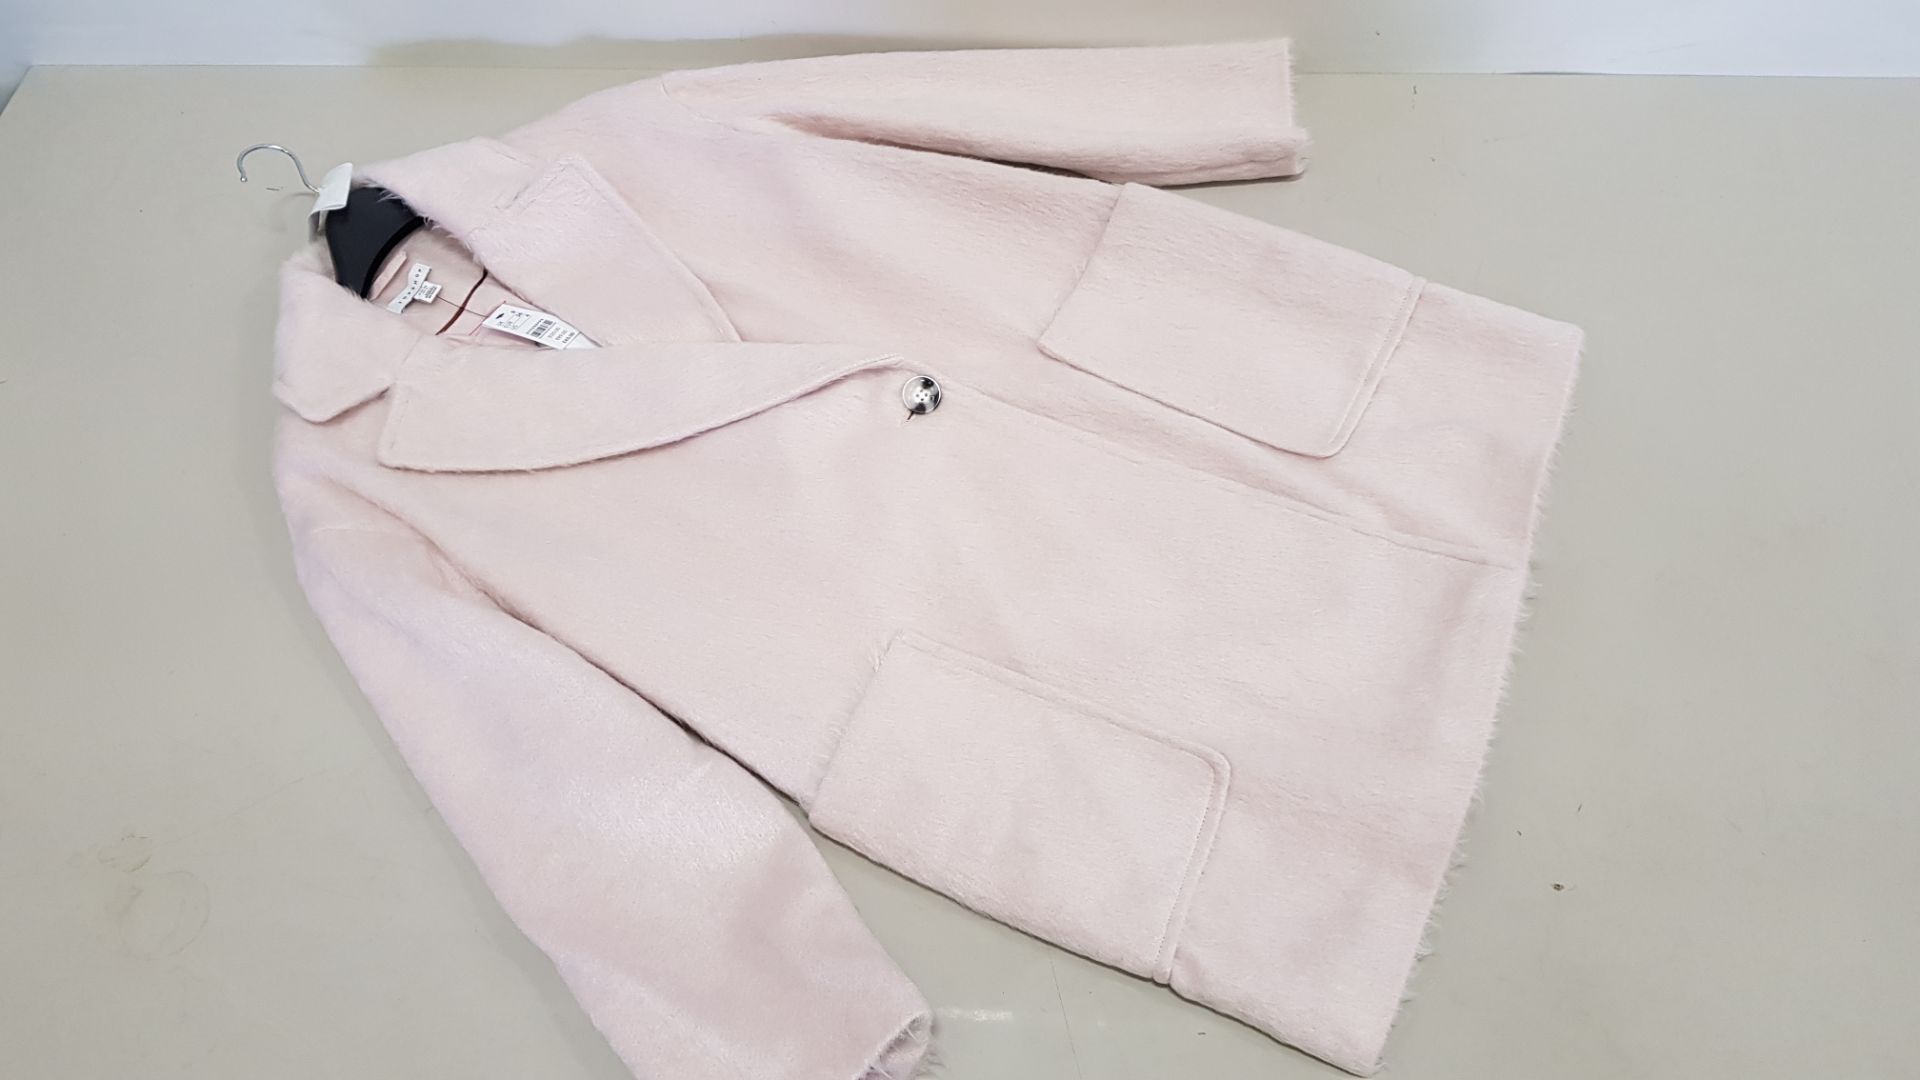 5 X BRAND NEW TOPSHOP PINK BUTTONED FAUX FUR JACKETS SIZE 16 ( 1 X SIZE 10) RRP £65.00 (TOTAL RRP £